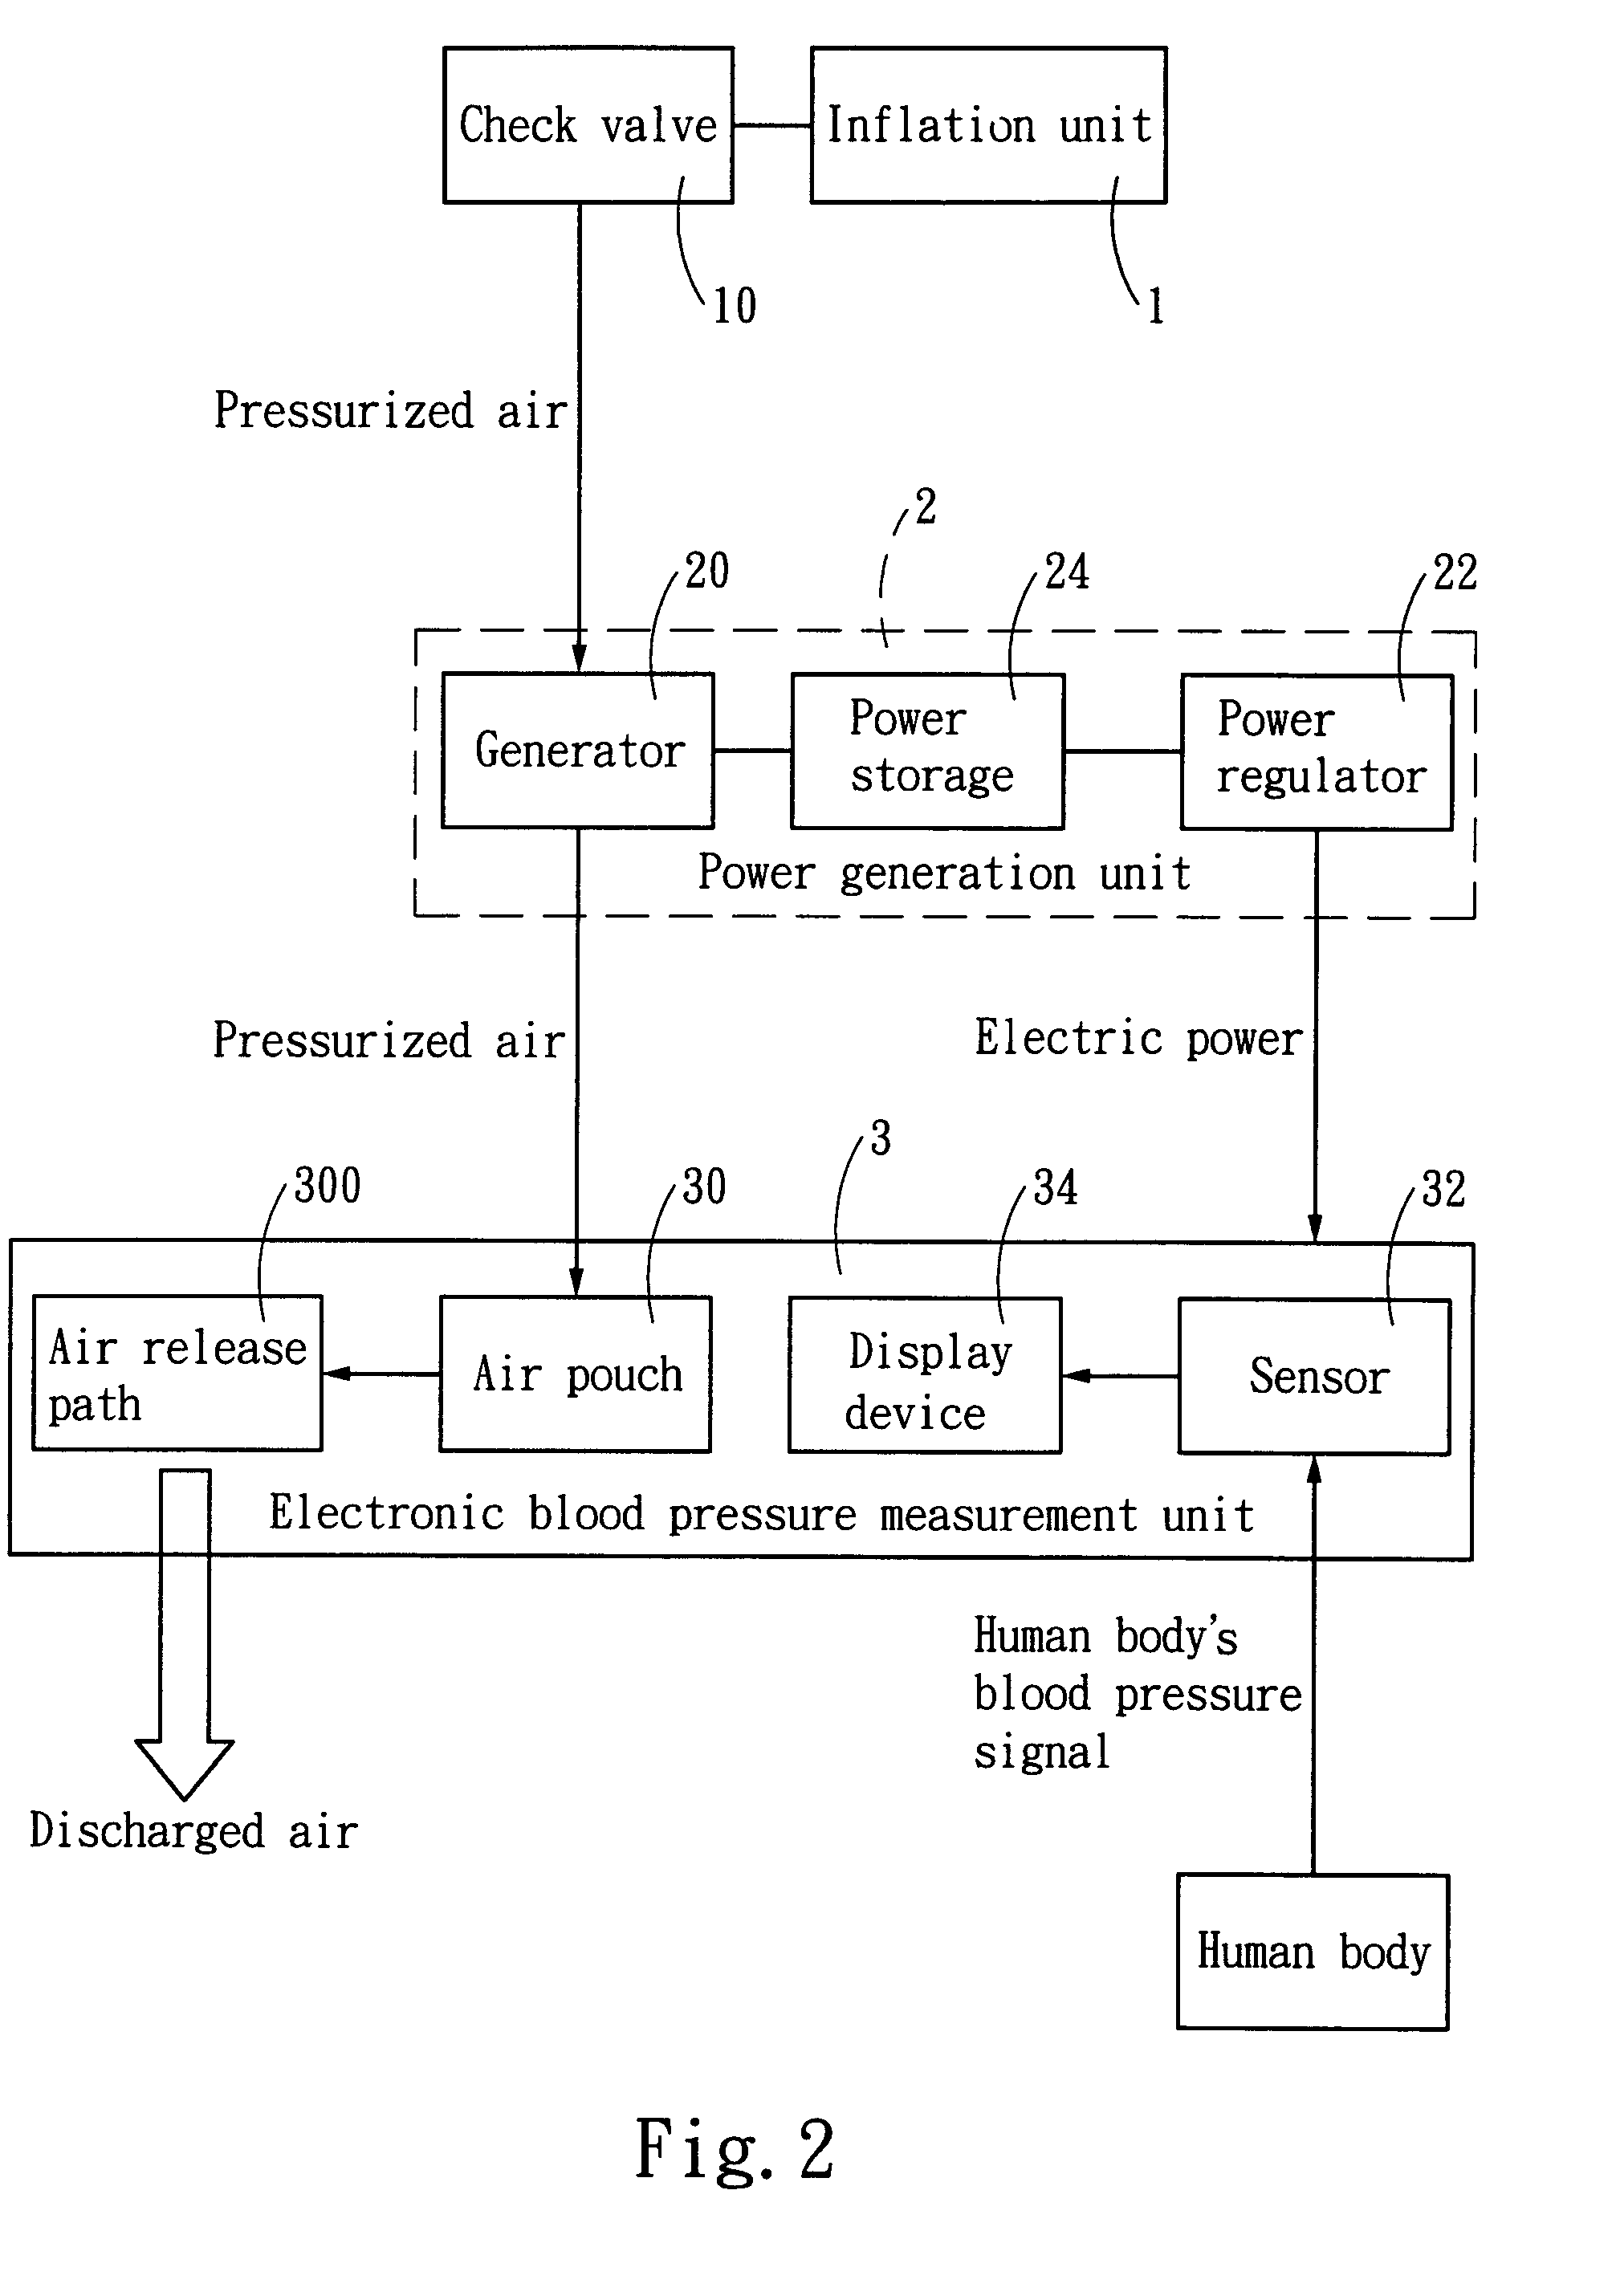 Manual-driven inflation-powered electronic blood pressure measuring apparatus